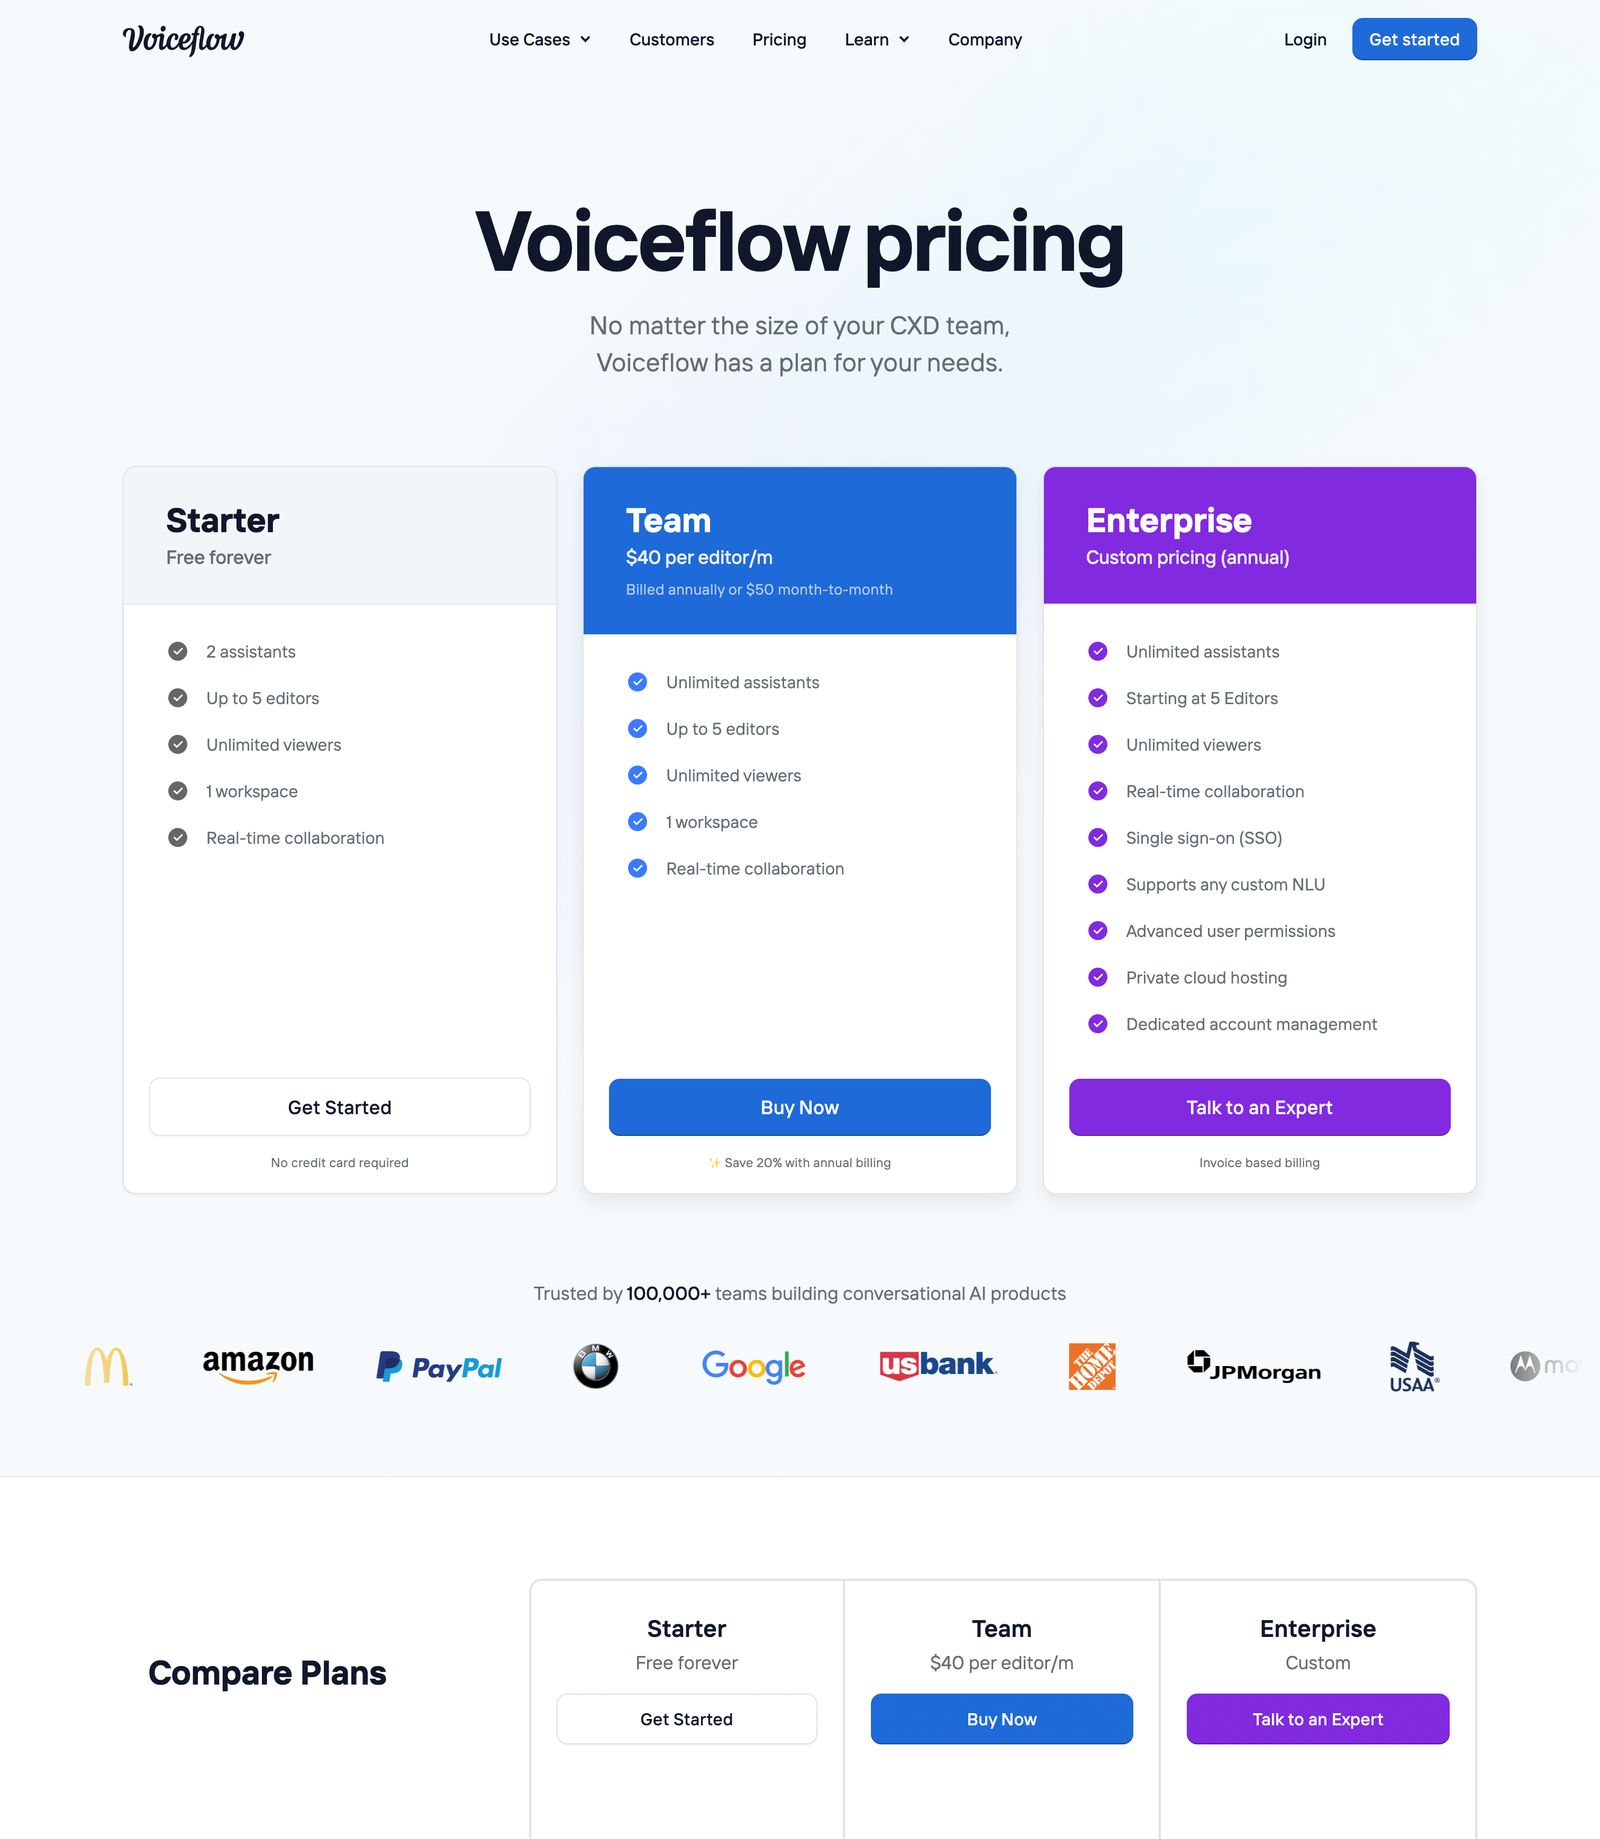 /articles/pricing-page-inspiration/pricing-page-design-example-8.jpg)_Pricing page example from Voiceflow